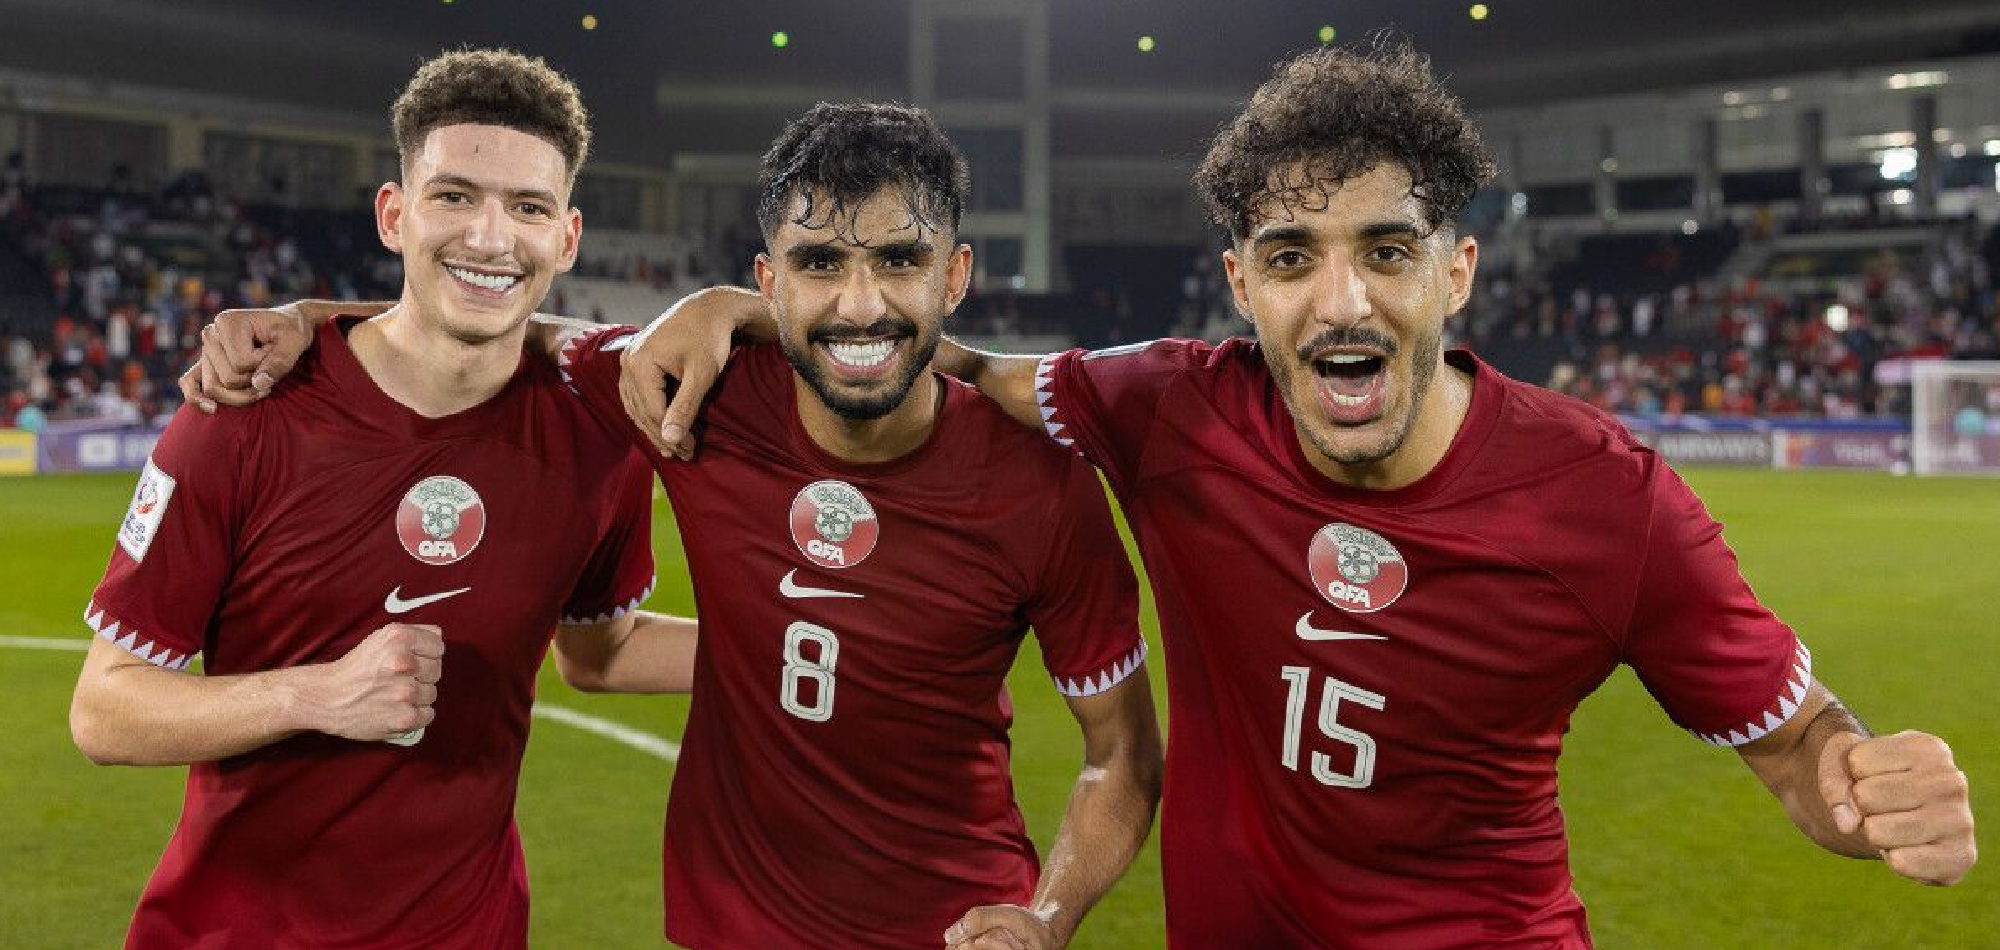 Coach Vale urges Qatar to build on win; Indonesia’s Shin stays positive